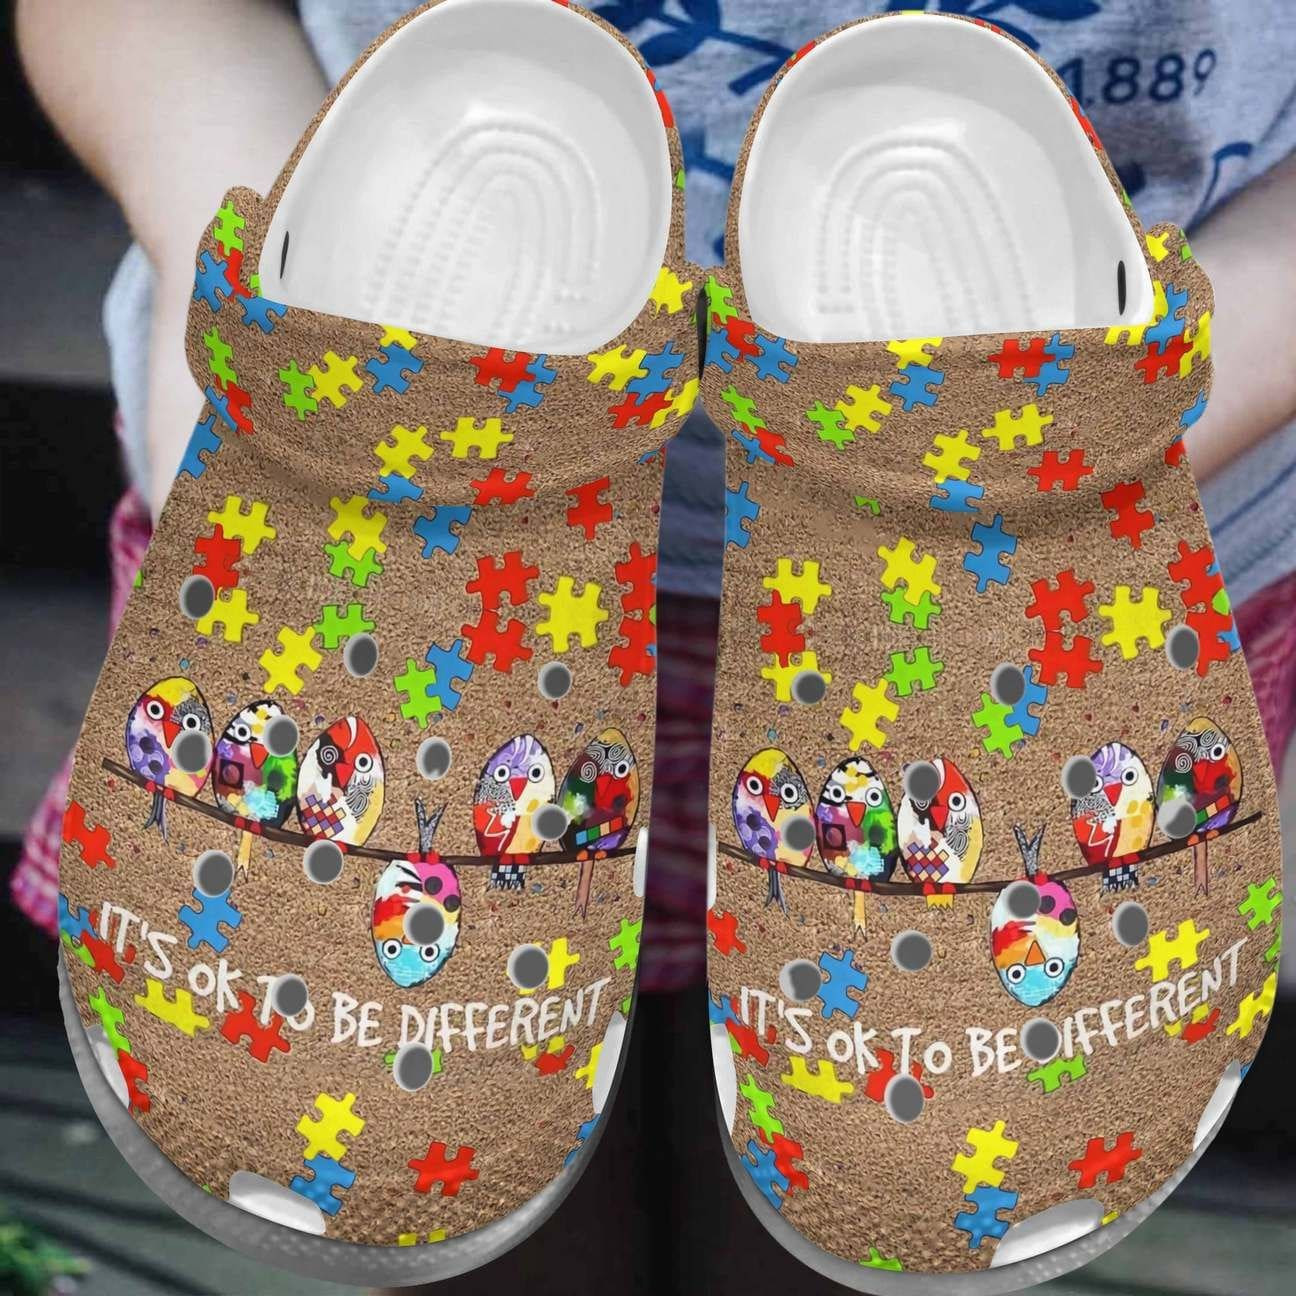 Autism Awareness Crocs It Is Oke To Be Different Crocband Clog Shoes For Men Women